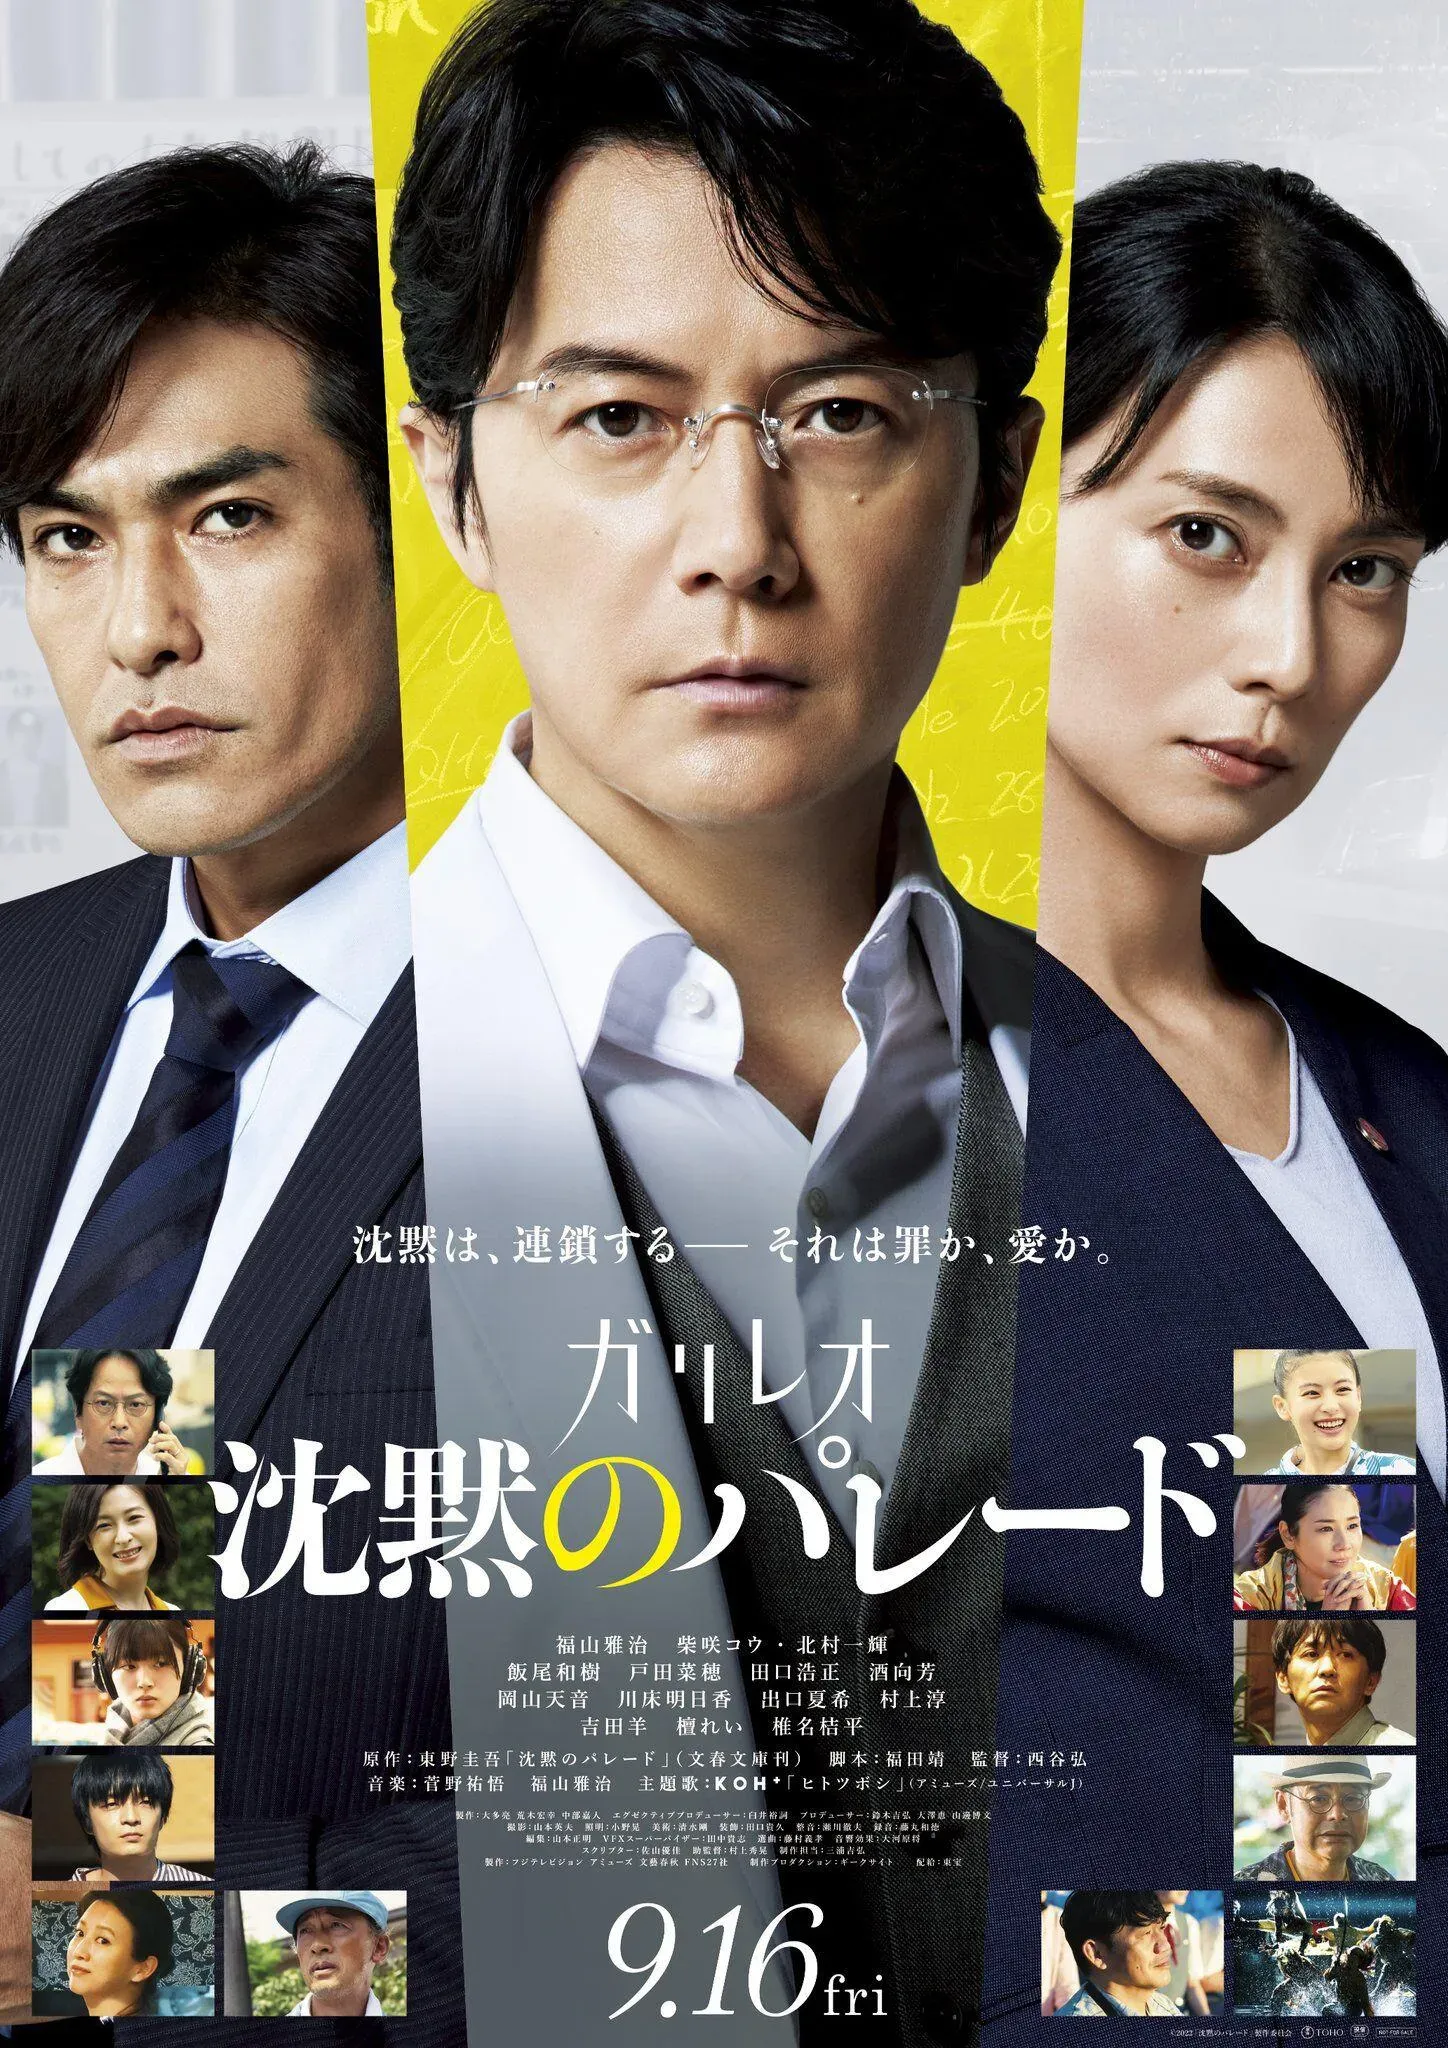 "Shen Yanのパレード‎" release new poster, it will be released in Japan on September 16 | FMV6